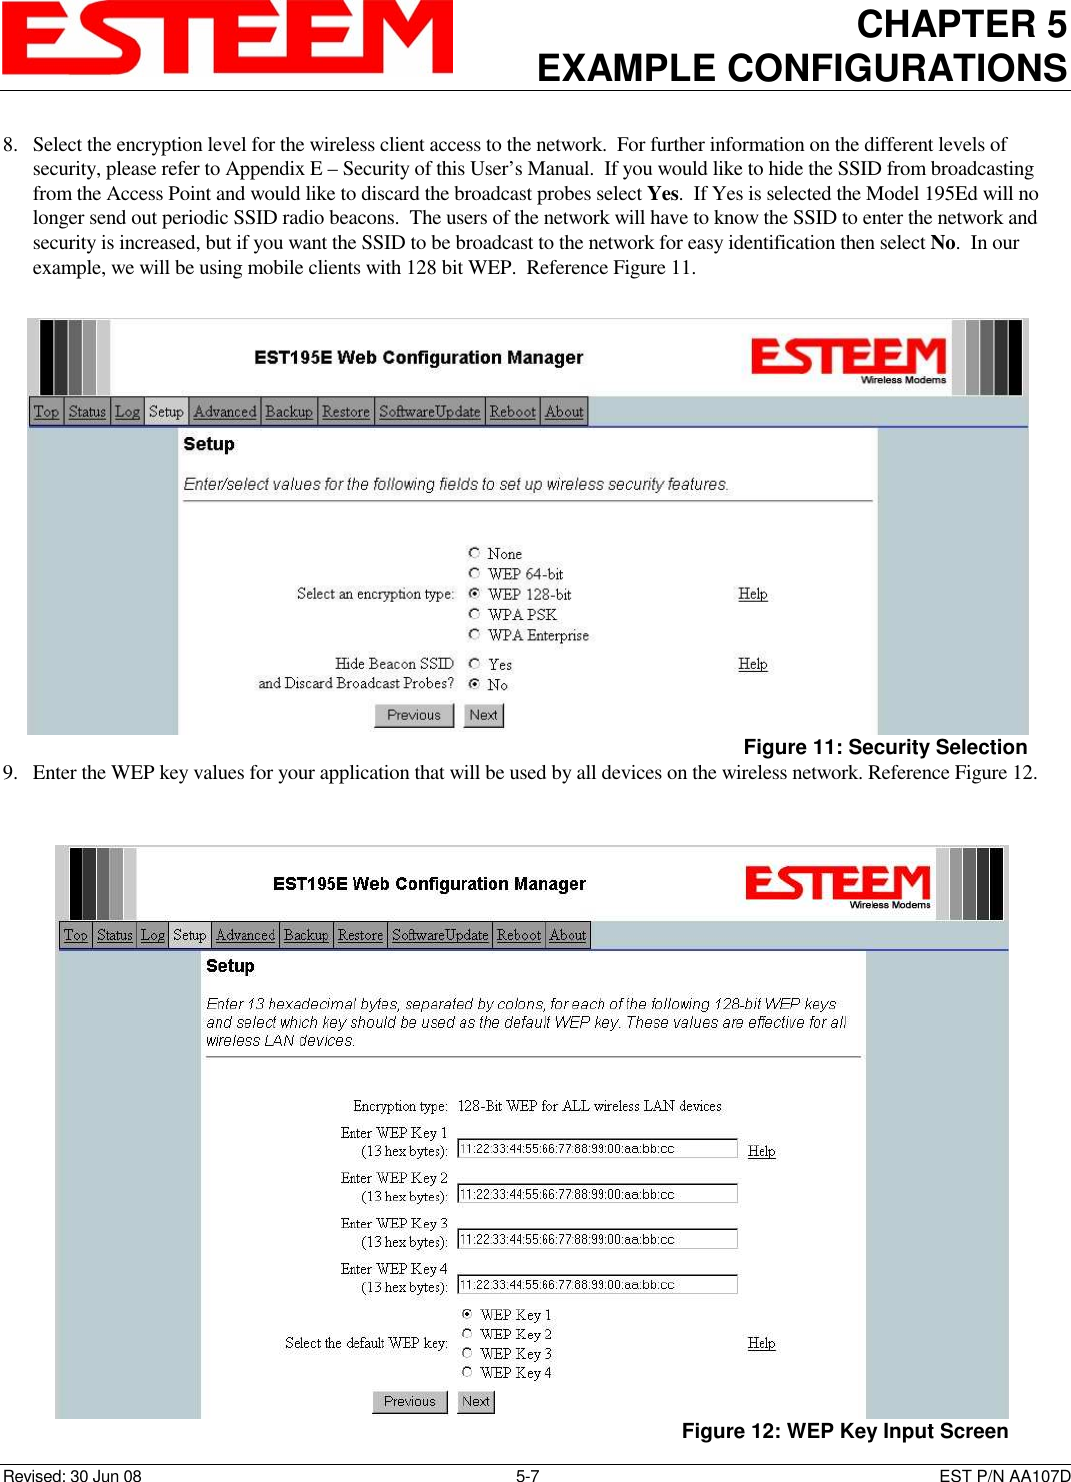 CHAPTER 5 EXAMPLE CONFIGURATIONS    Revised: 30 Jun 08  5-7  EST P/N AA107D 8. Select the encryption level for the wireless client access to the network.  For further information on the different levels of security, please refer to Appendix E – Security of this User’s Manual.  If you would like to hide the SSID from broadcasting from the Access Point and would like to discard the broadcast probes select Yes.  If Yes is selected the Model 195Ed will no longer send out periodic SSID radio beacons.  The users of the network will have to know the SSID to enter the network and security is increased, but if you want the SSID to be broadcast to the network for easy identification then select No.  In our example, we will be using mobile clients with 128 bit WEP.  Reference Figure 11.  9. Enter the WEP key values for your application that will be used by all devices on the wireless network. Reference Figure 12.   Figure 11: Security Selection  Figure 12: WEP Key Input Screen 